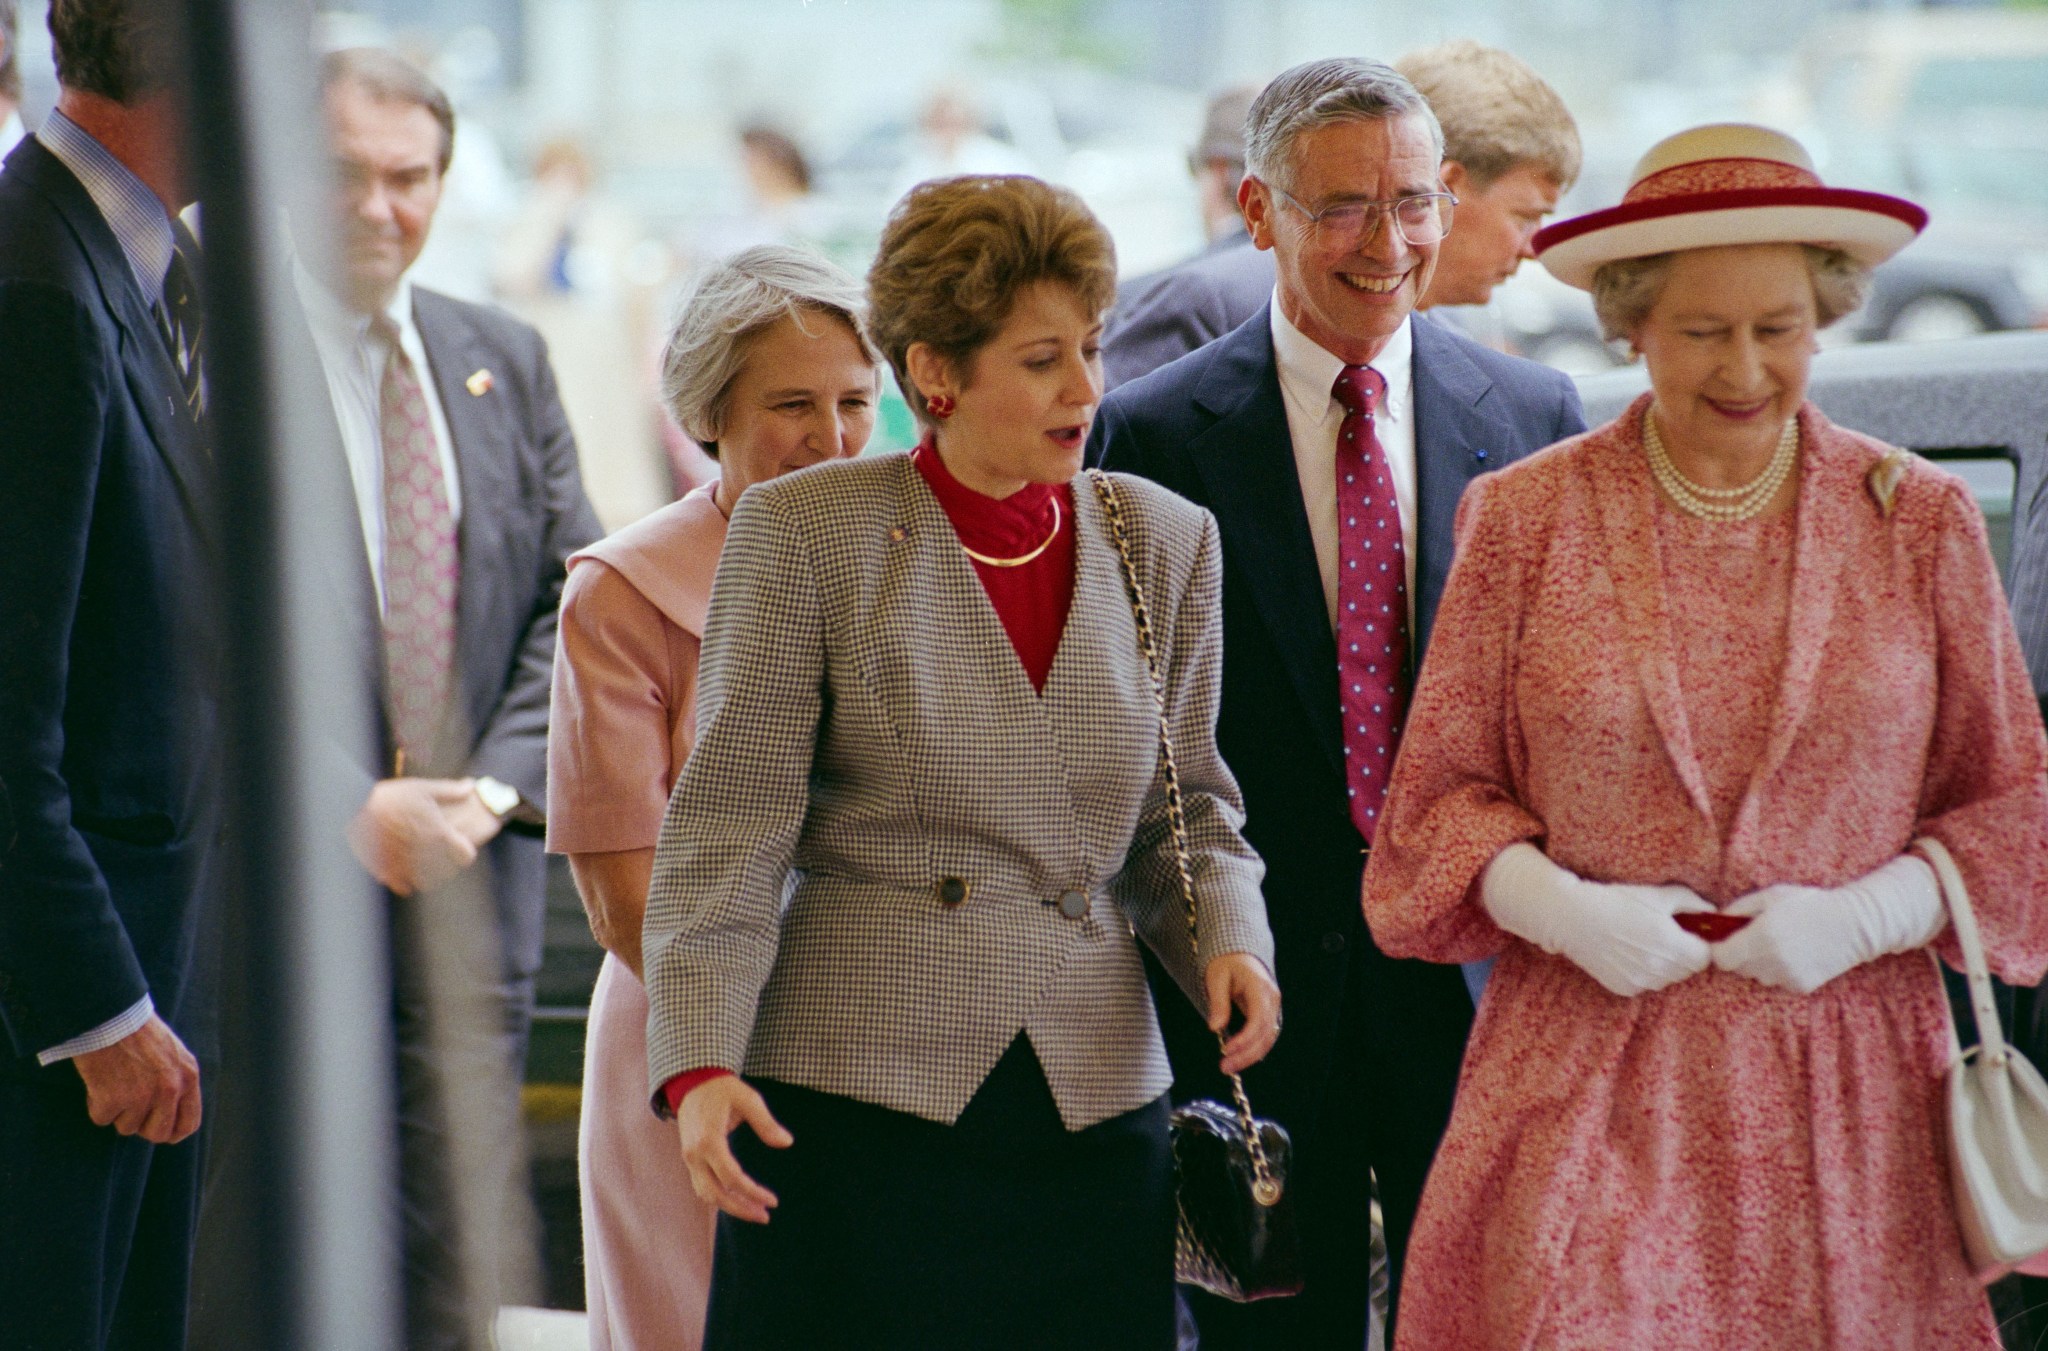 Johnson Space Center Director Aaron Cohen walking with Houston Mayor Kathy Whitmire and Queen Elizabeth II of England during her visit to Johnson.